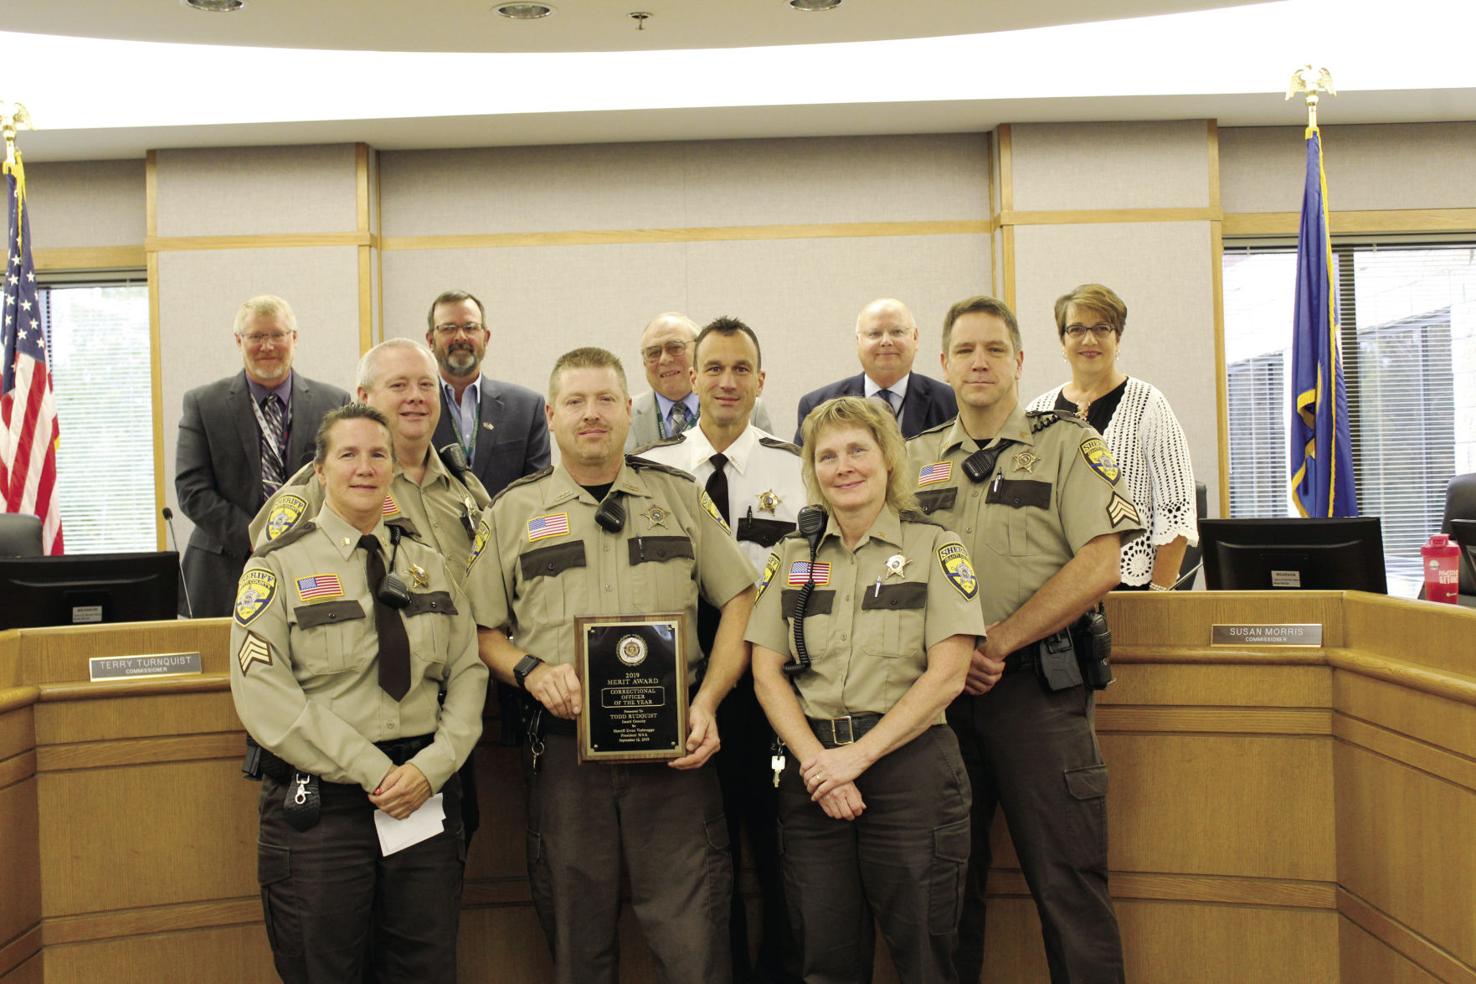 Isanti County employee honored as Correctional Officer of the Year